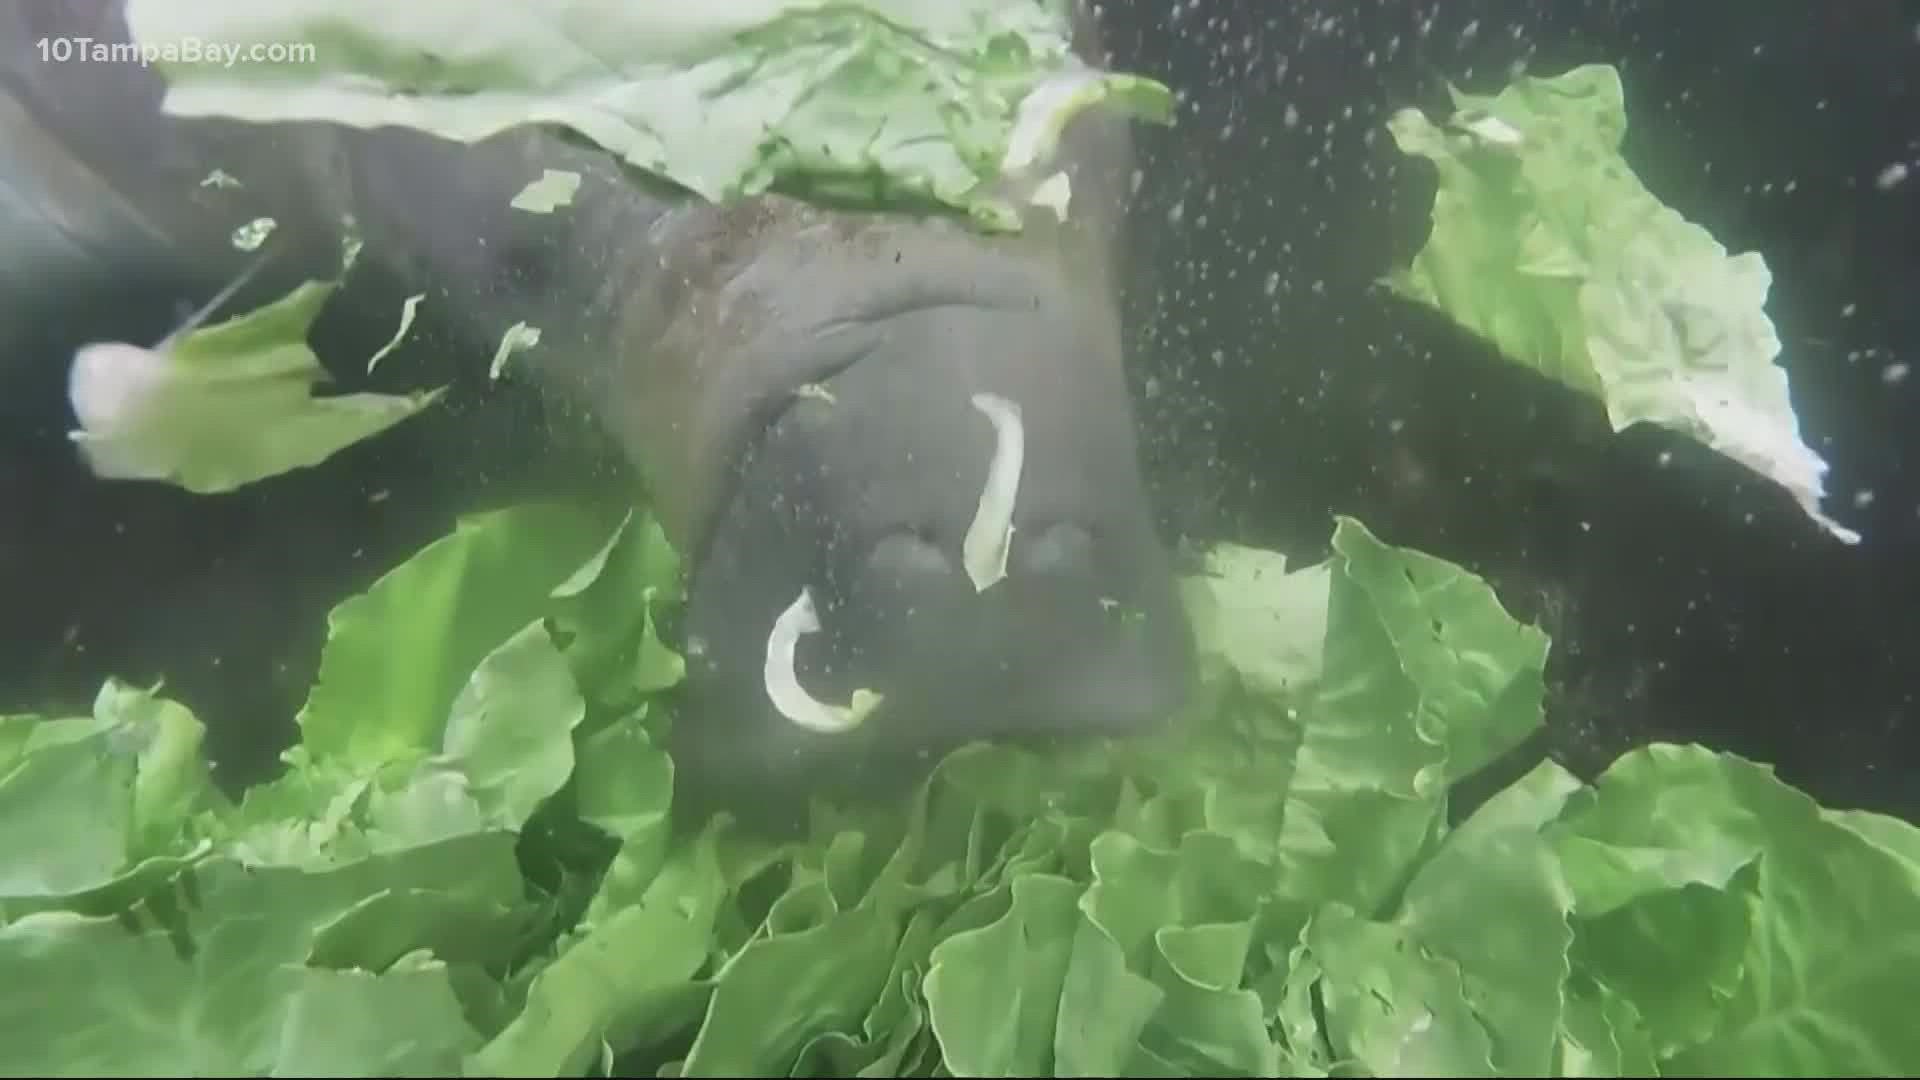 Wildlife experts said the manatees are fed about 20,000 pounds of lettuce a week.